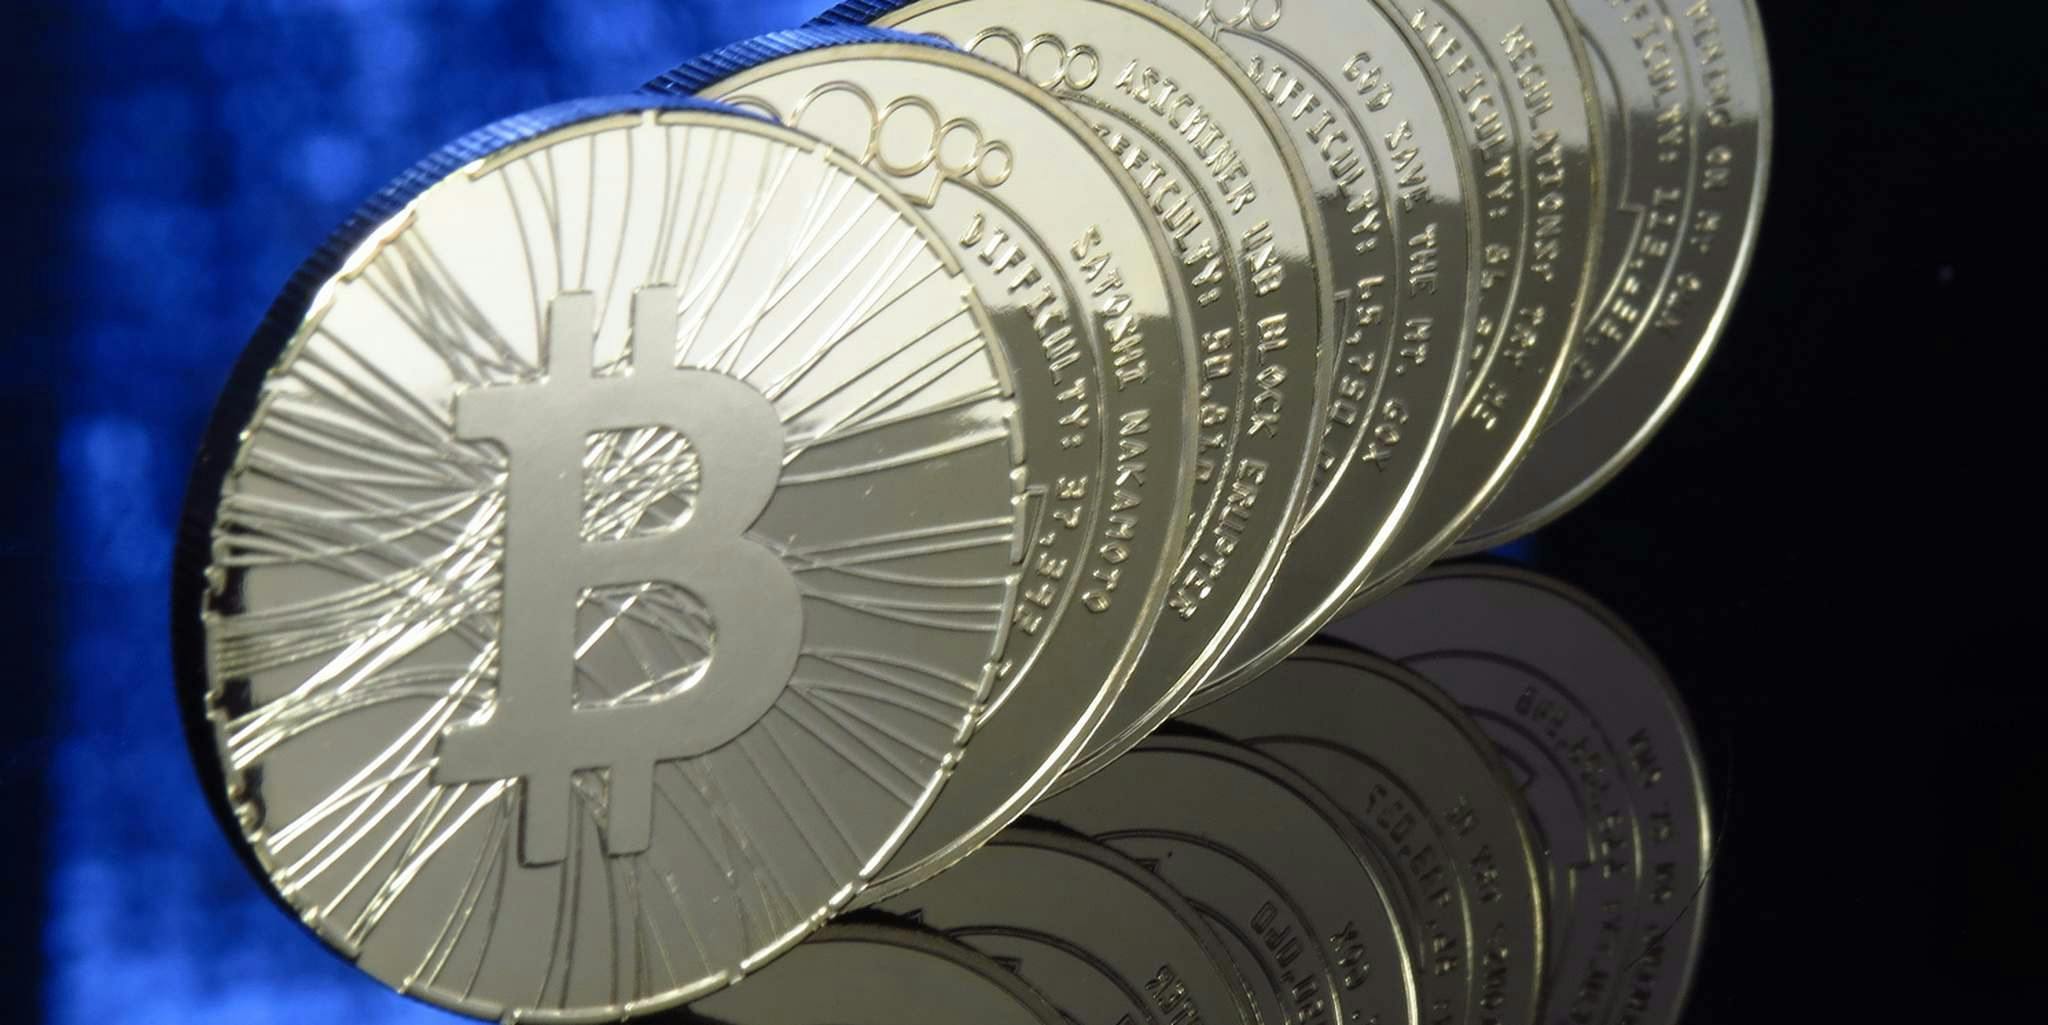 3 indicted on fraud bitcoin sports star robert